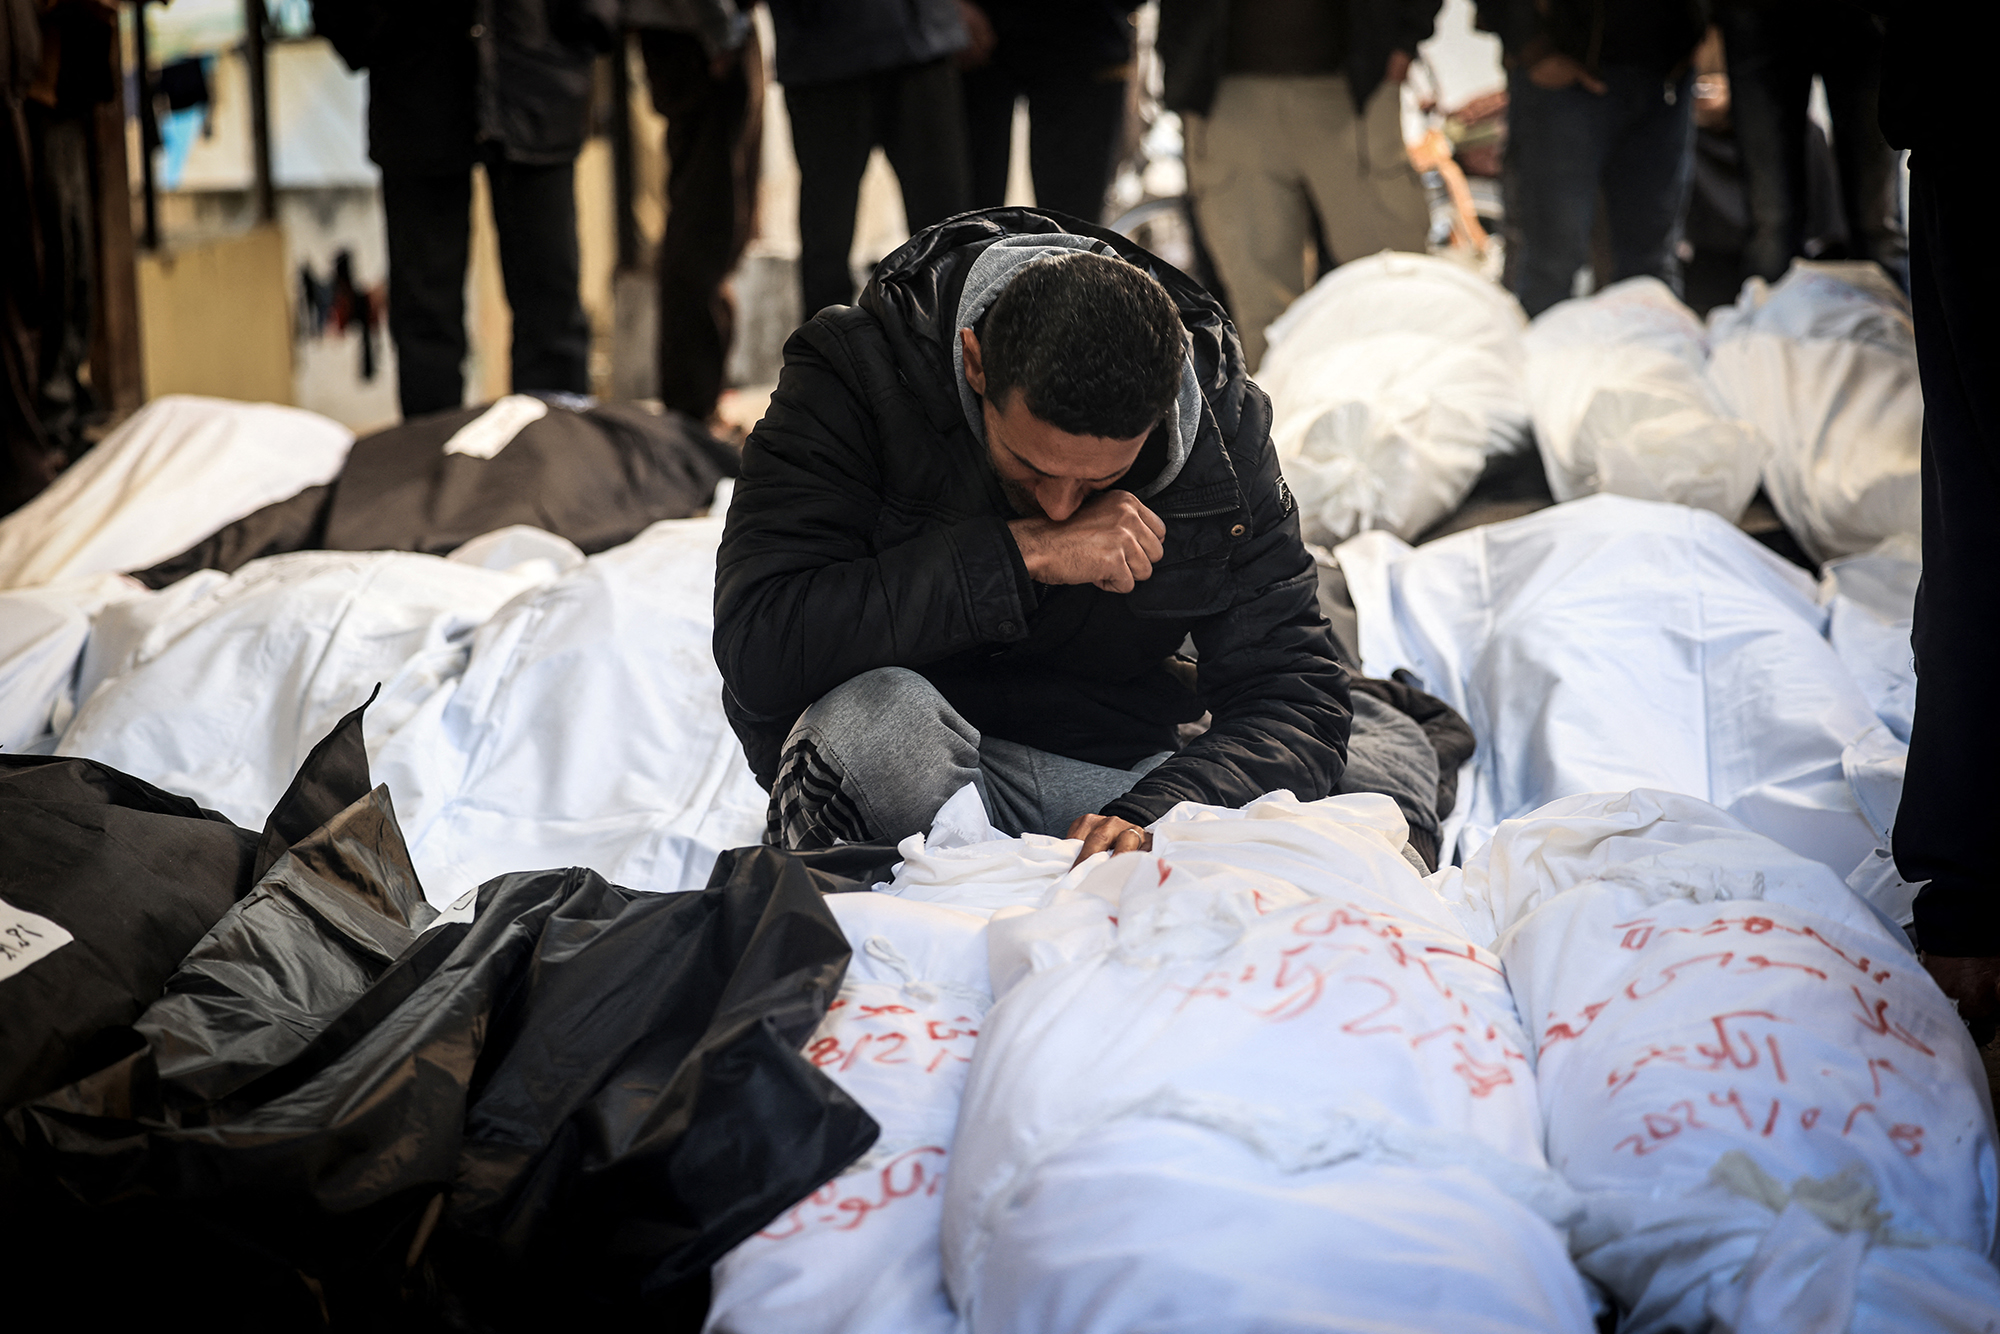 A Palestinian man mourns over shrouded bodies of relatives killed in an overnight Israeli bombardment in southern Gaza on February 8.